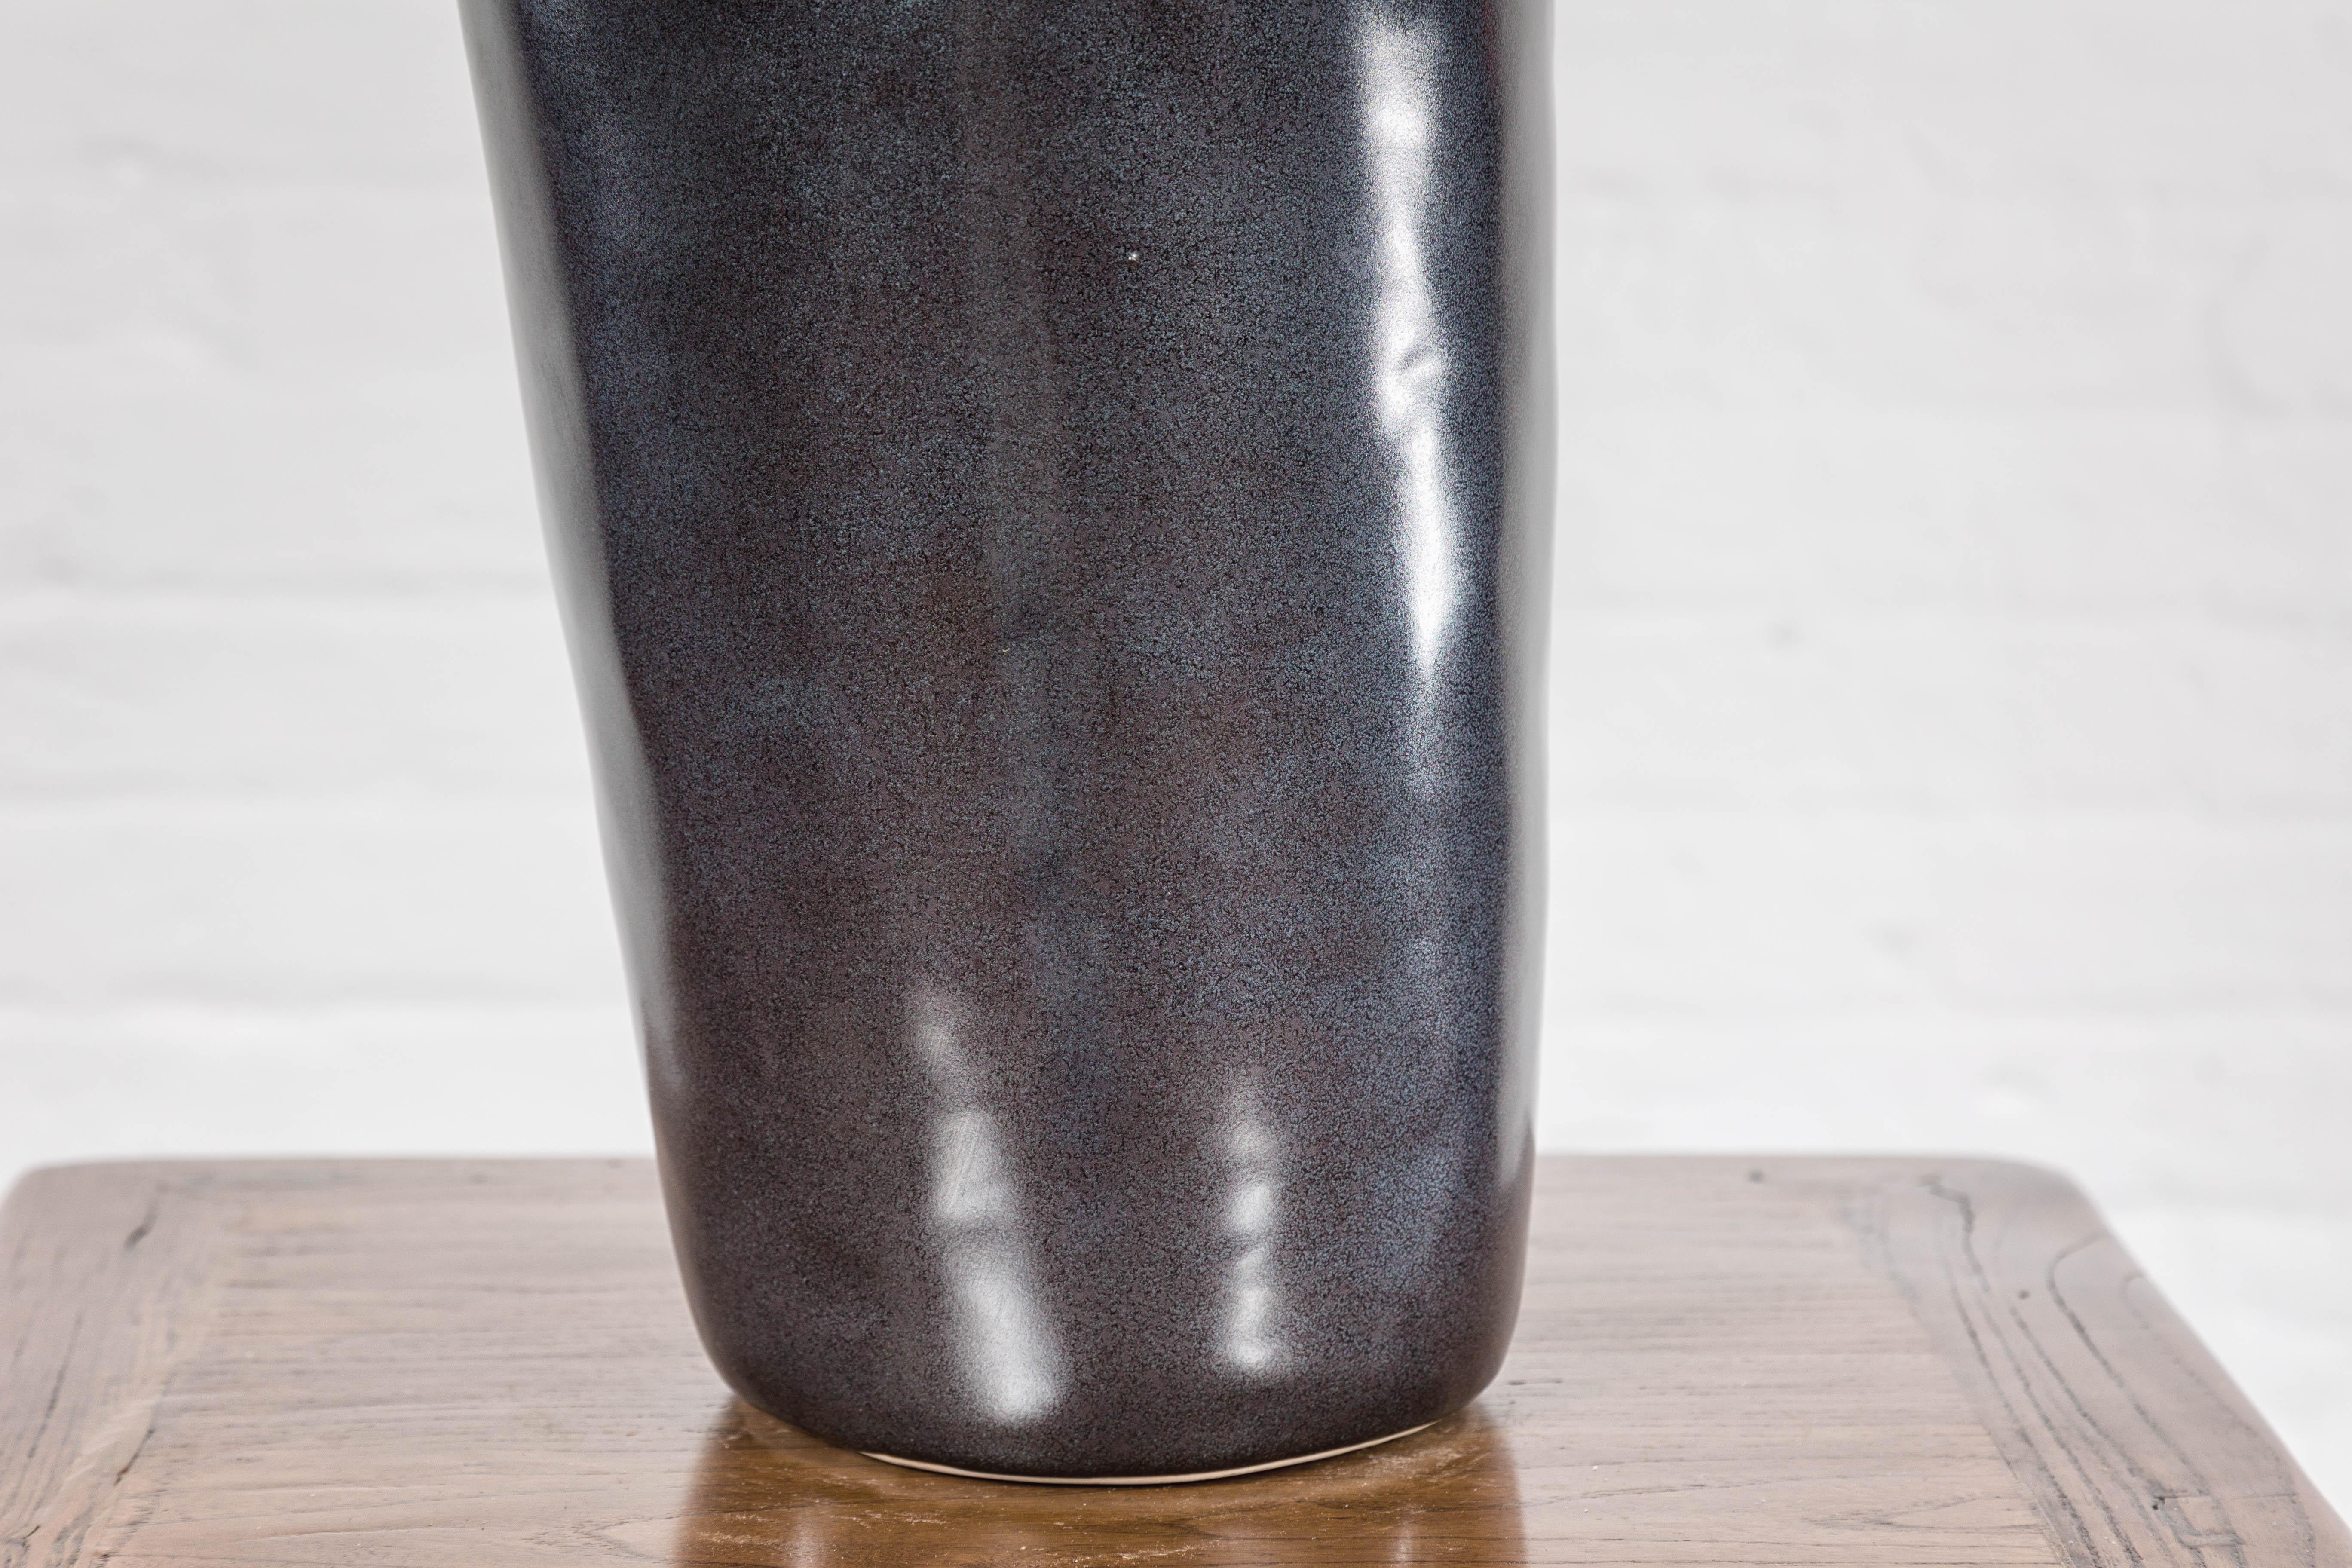 Handmade Artisan Ceramic Vase with Olive Green, Dark Grey and Brown Dripping For Sale 6